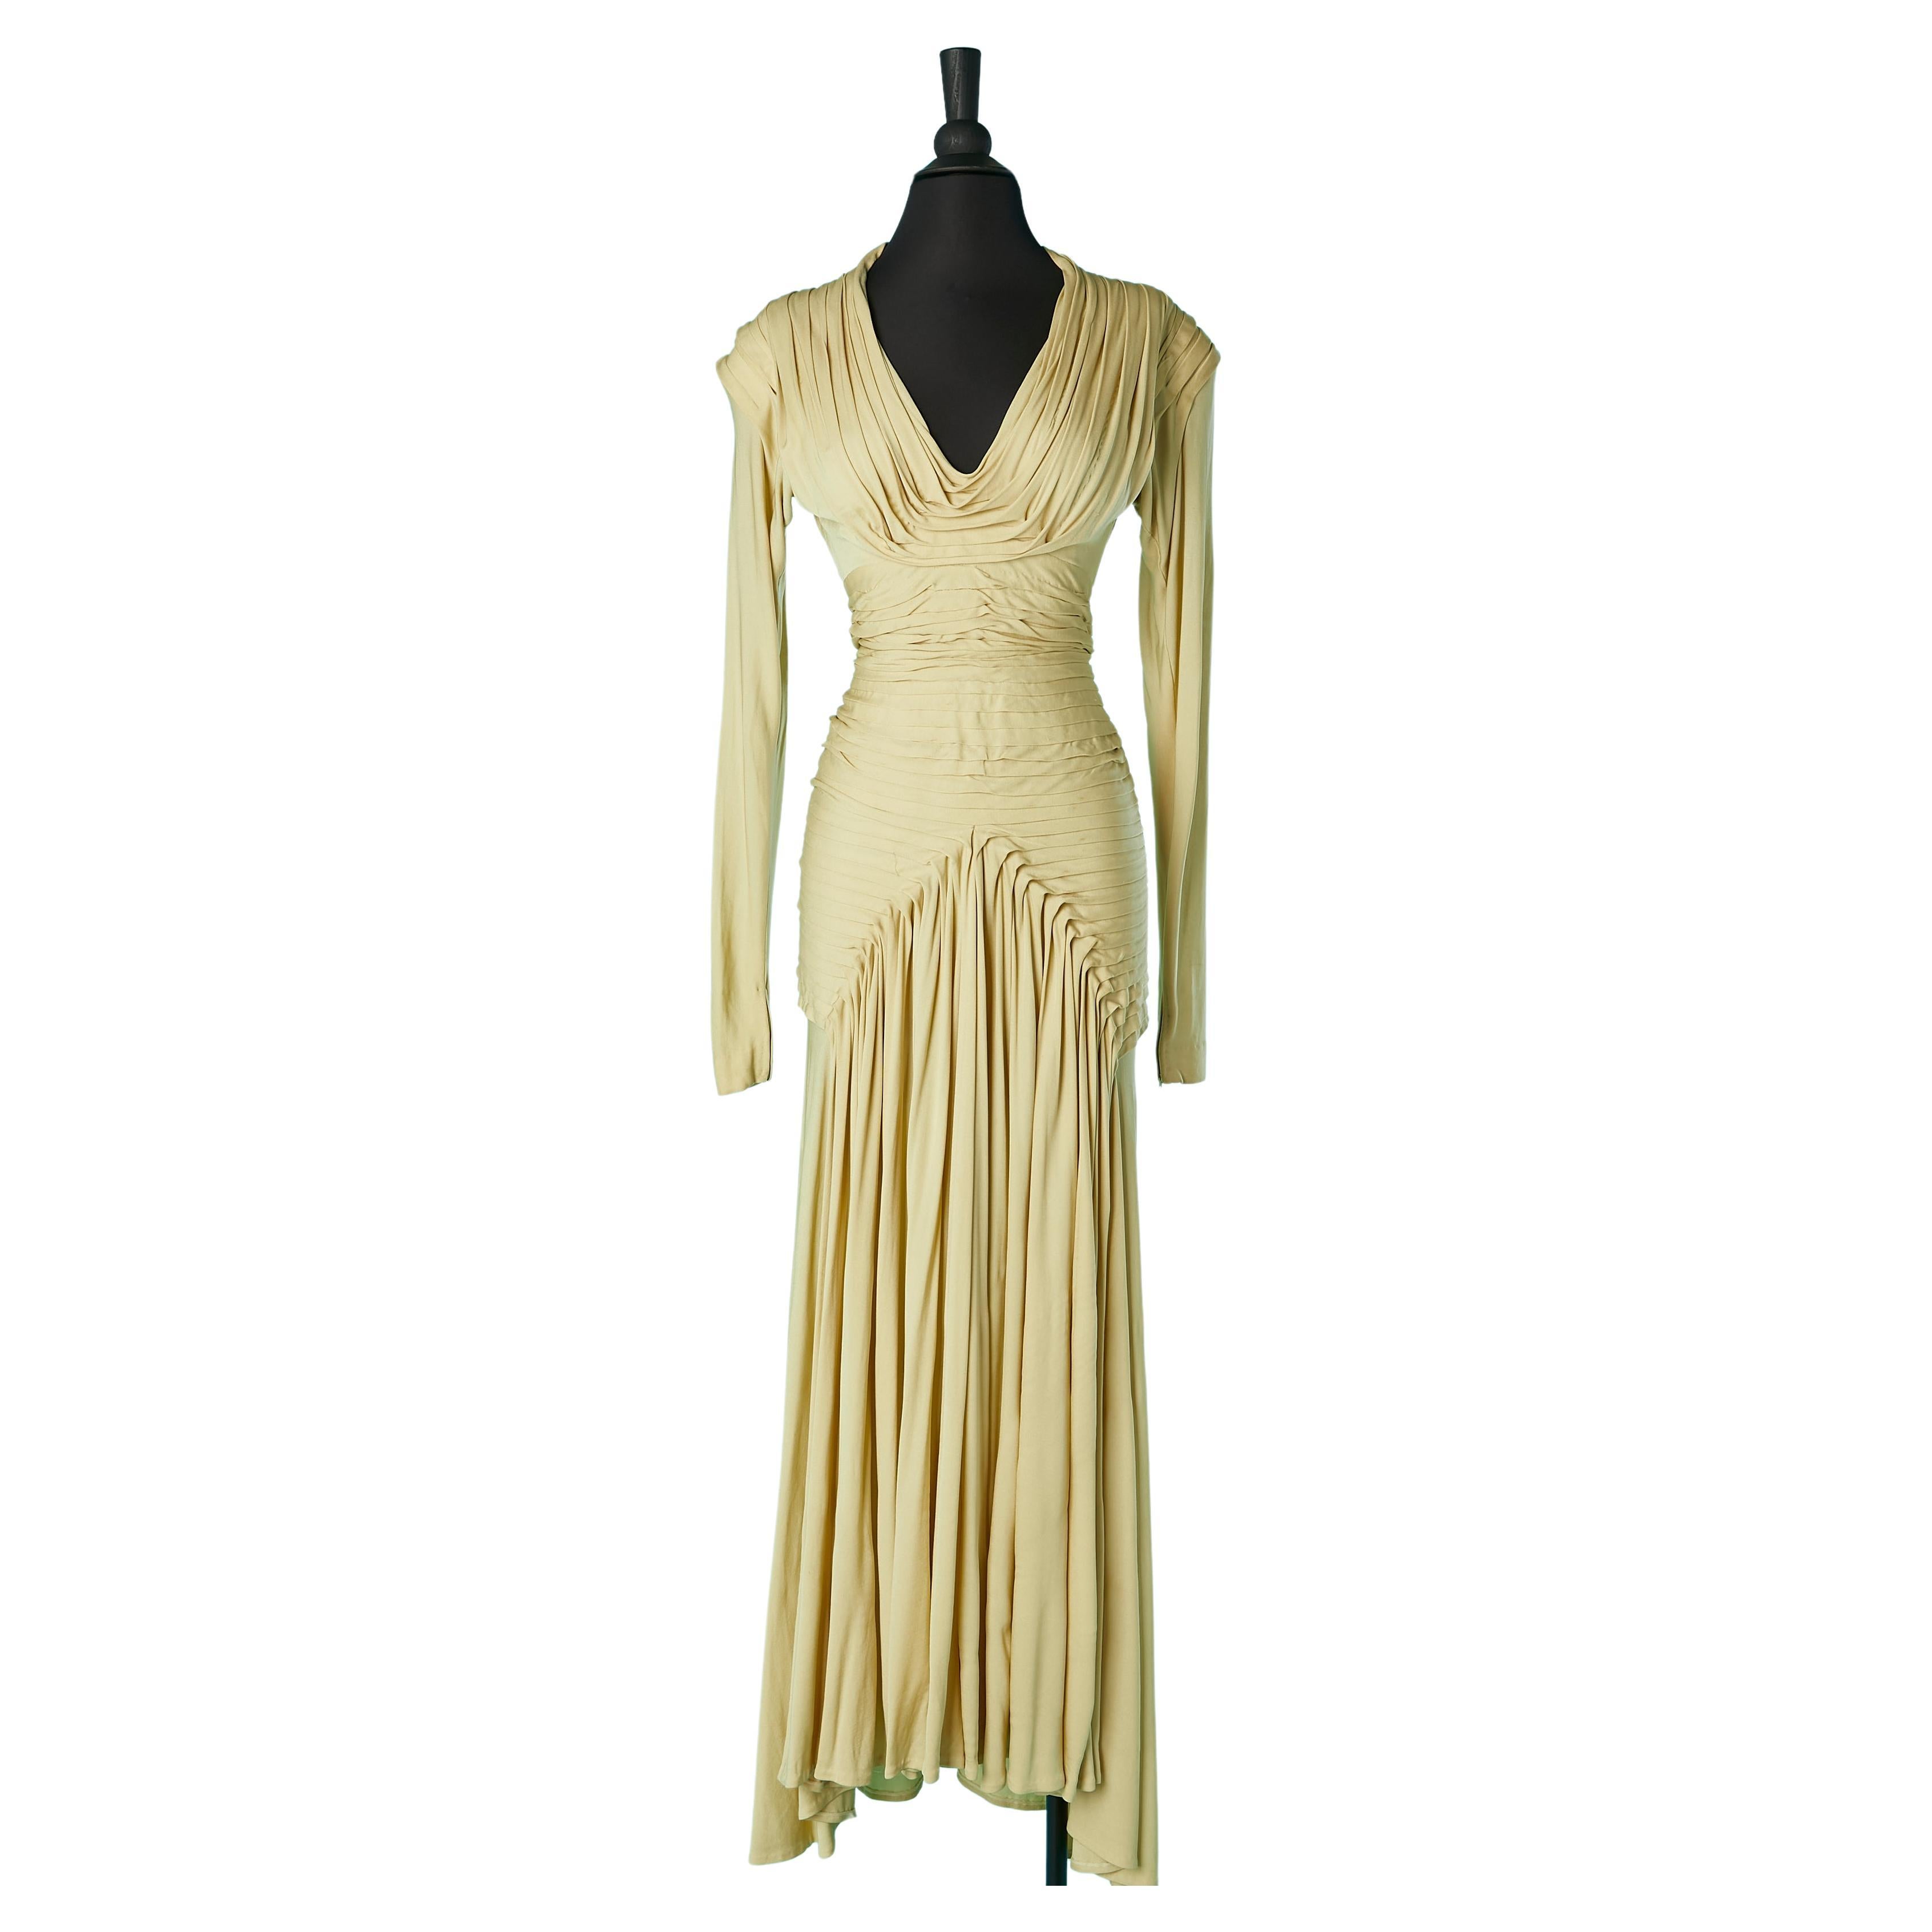 Iconic silk jersey draped and pleated handmade evening dress Lanvin Paris 1944 For Sale